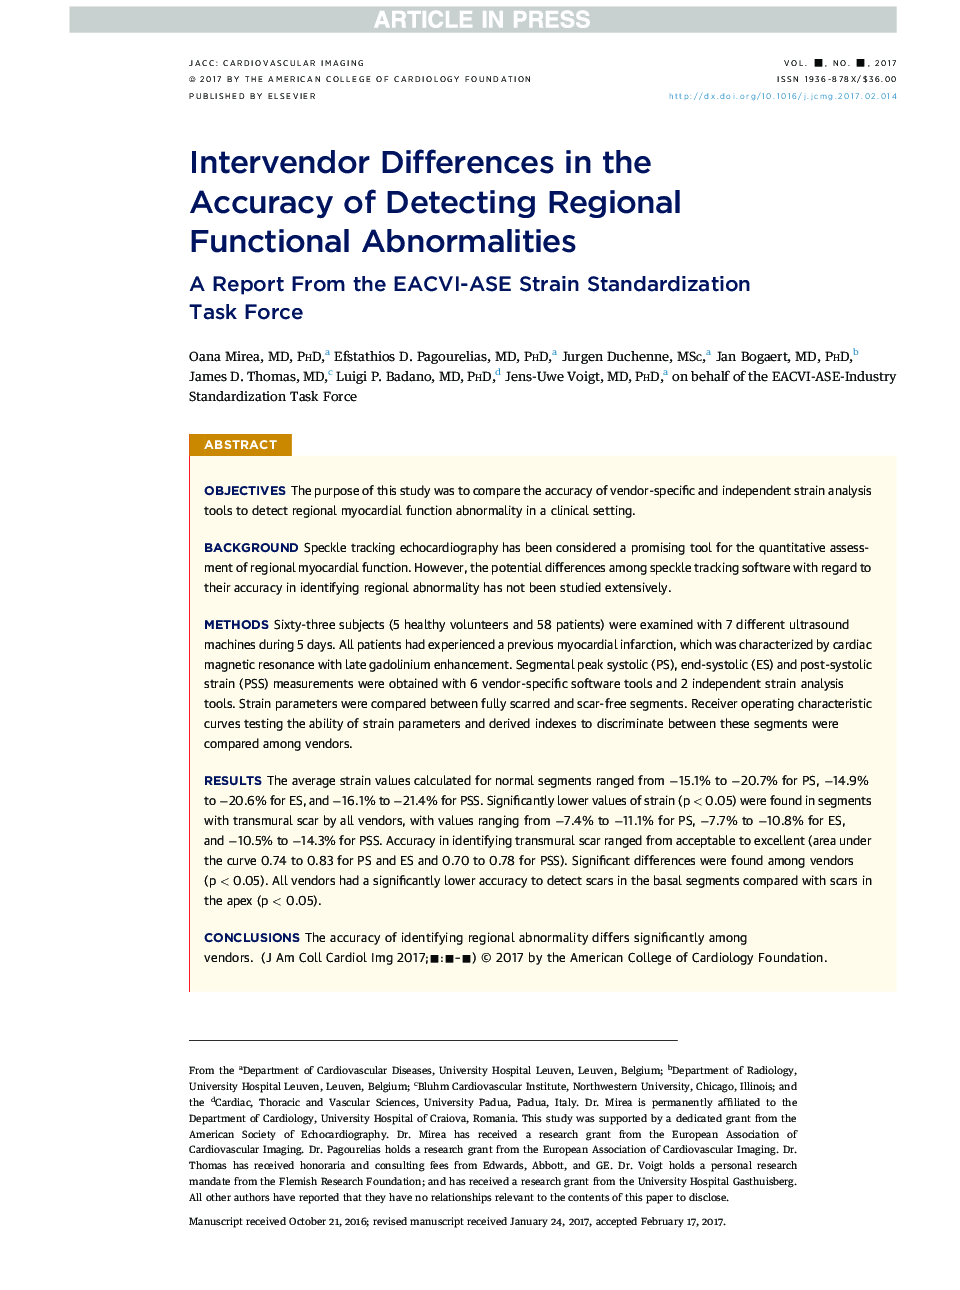 Intervendor Differences in the AccuracyÂ ofÂ Detecting Regional FunctionalÂ Abnormalities